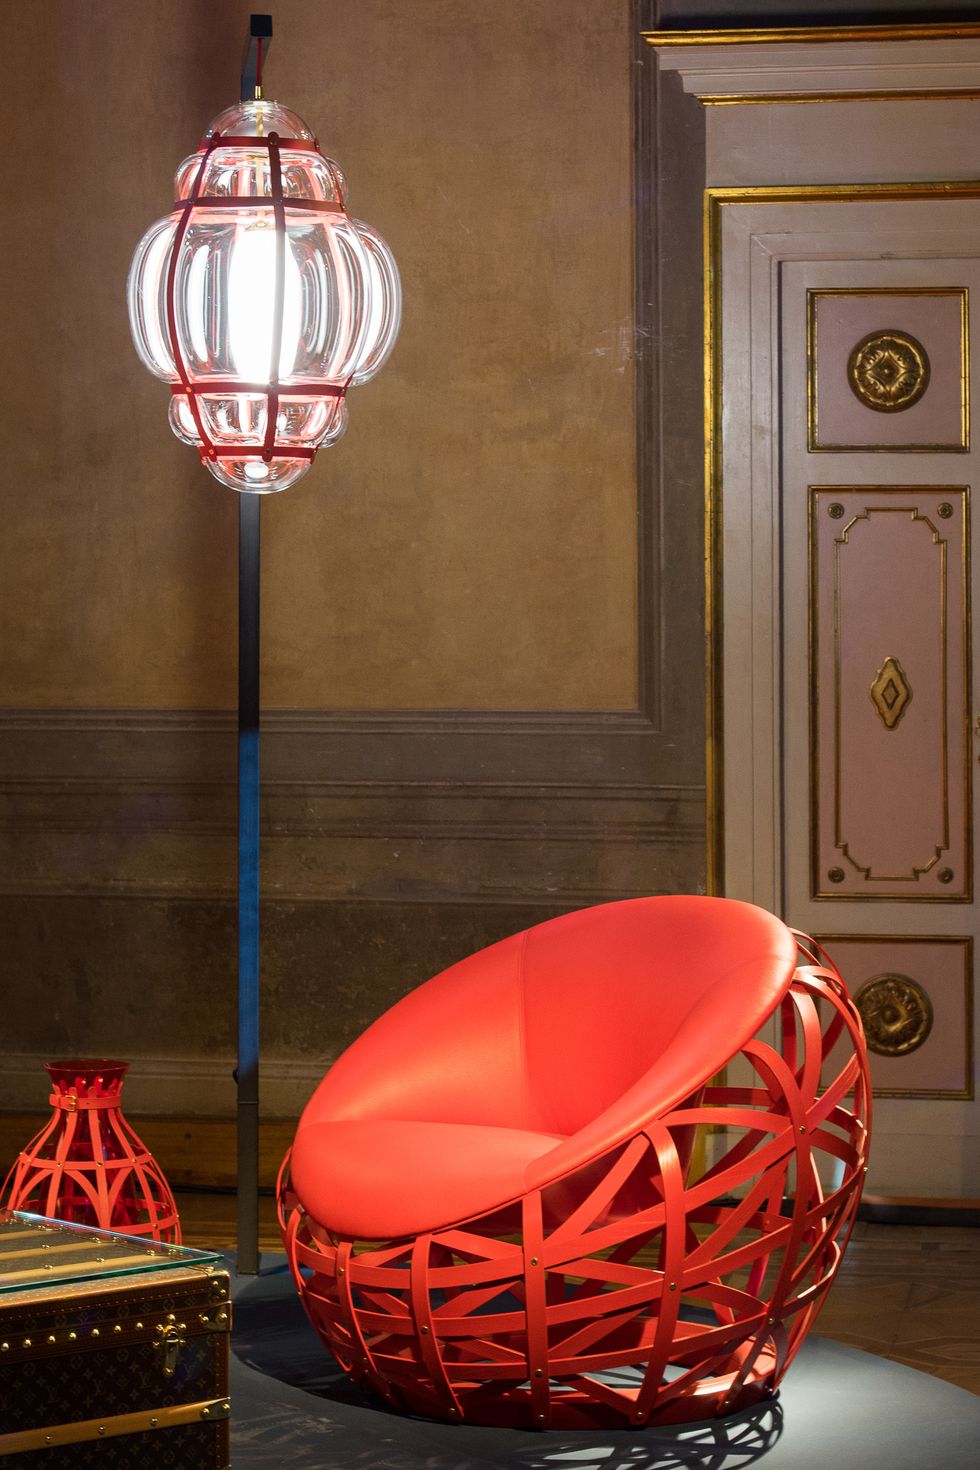 FuoriSalone 2019: Louis Vuitton presents its latest Objets Nomades